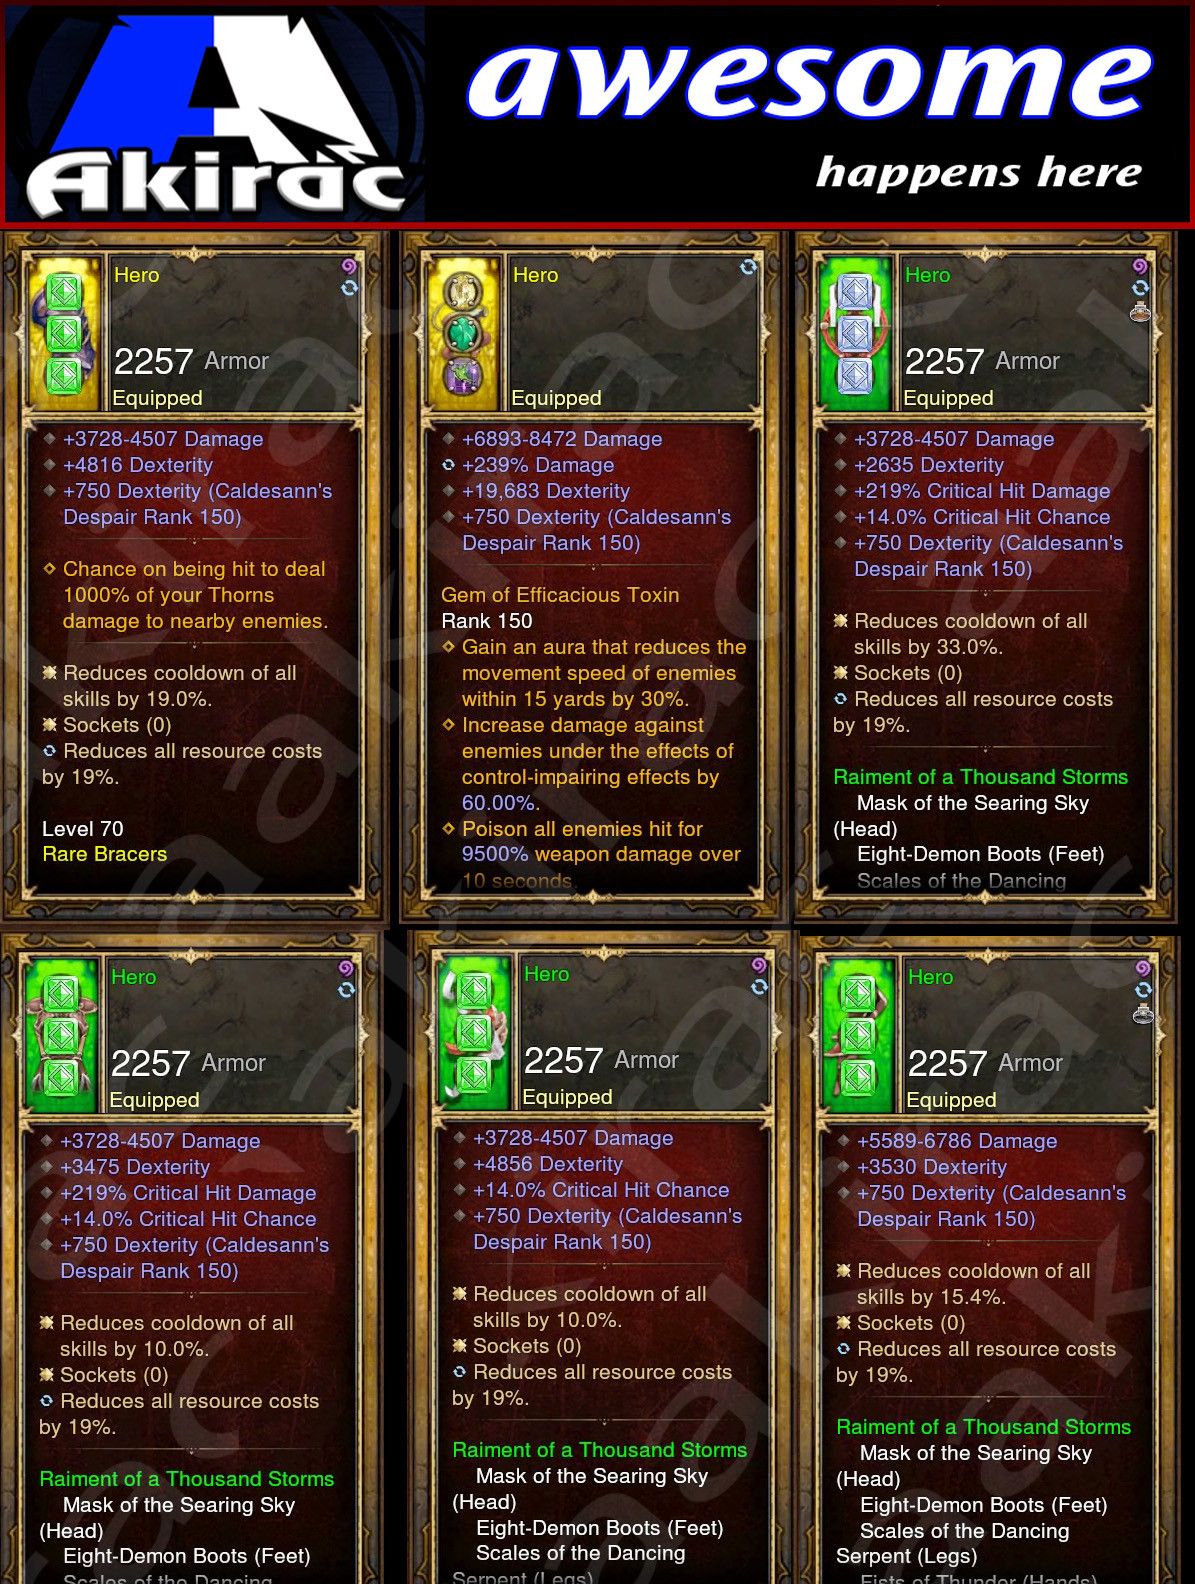 Diablo 3 Immortal v1 Thousand Storms Monk Modded Set for Rift 150 Hero Diablo 3 Mods ROS Seasonal and Non Seasonal Save Mod - Modded Items and Gear - Hacks - Cheats - Trainers for Playstation 4 - Playstation 5 - Nintendo Switch - Xbox One